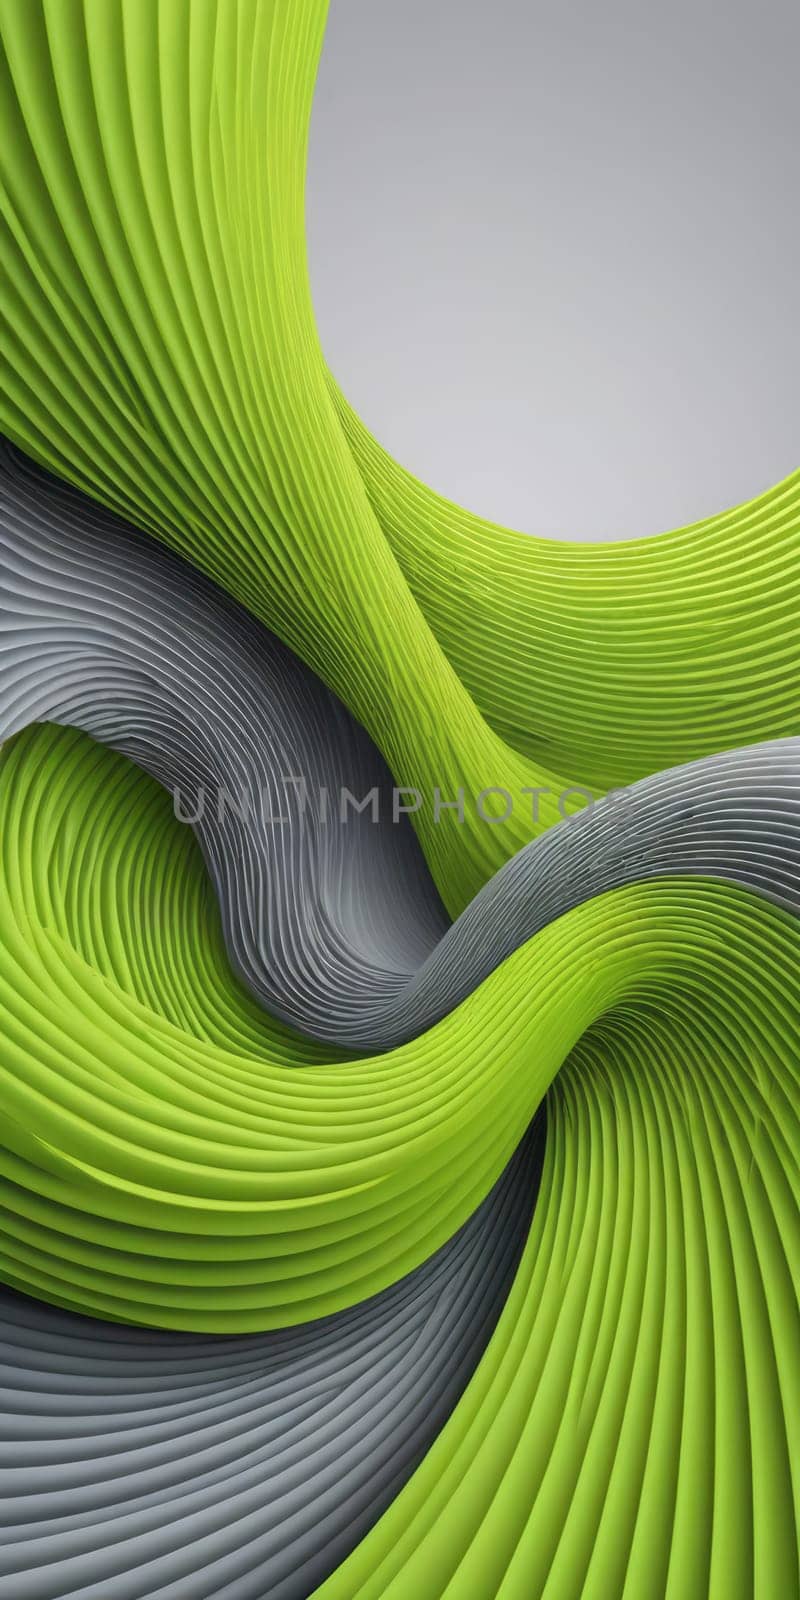 Coiled Shapes in Lime and Gray by nkotlyar